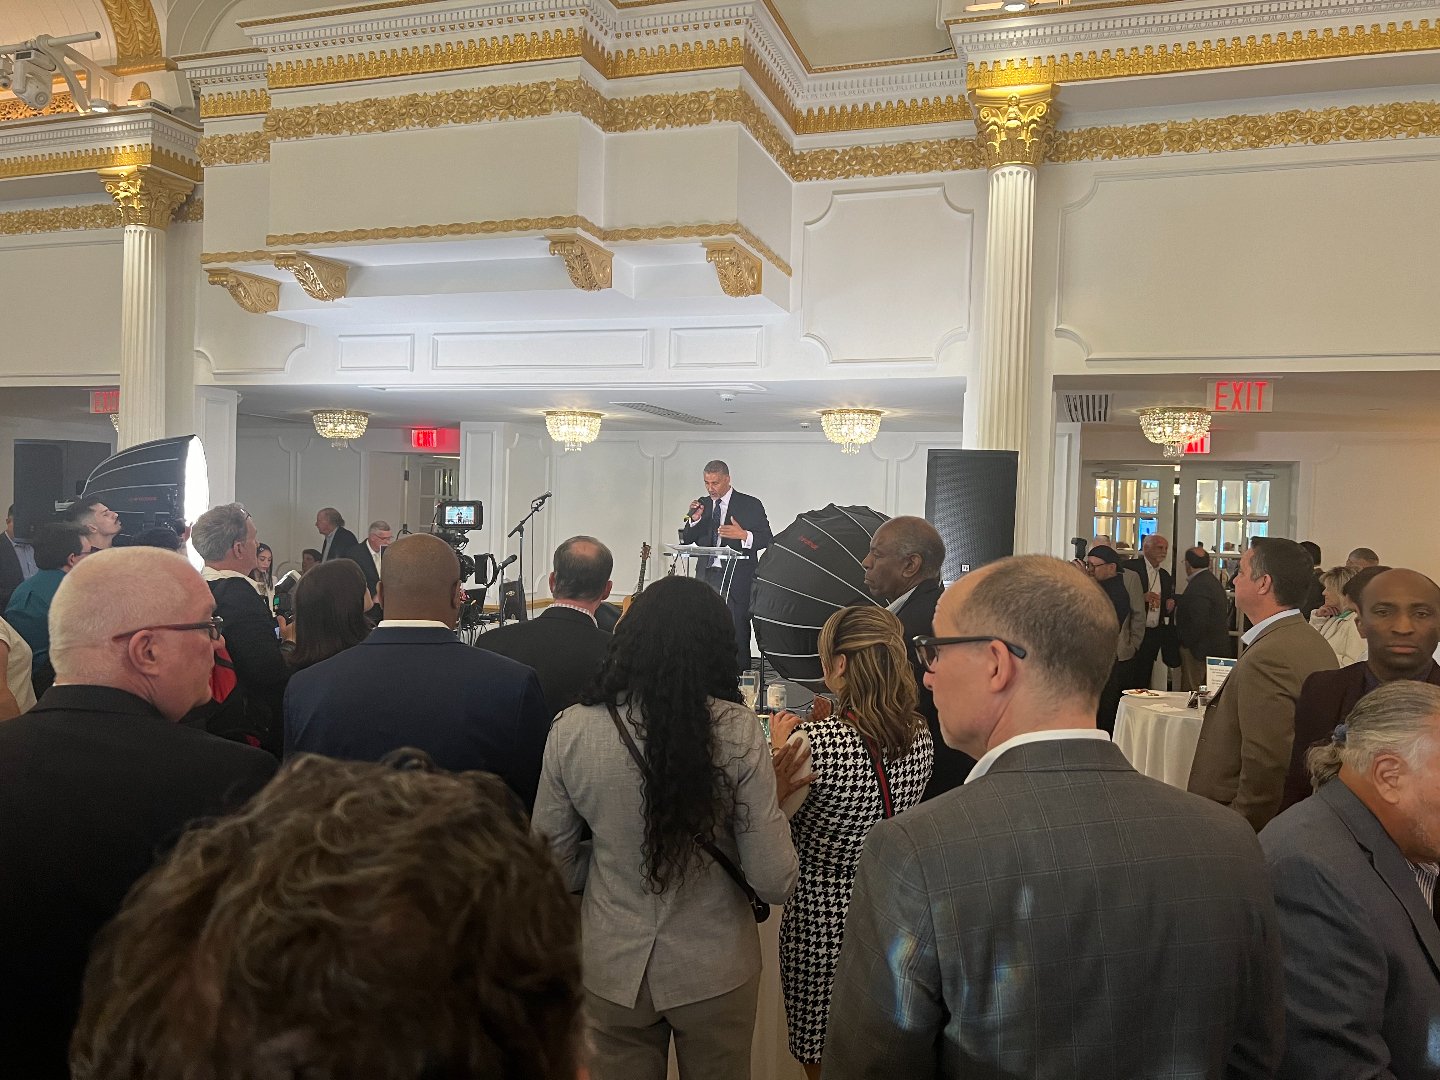 Had a great time at the NJ Neighborhood Achievement Awards on May 1st! It was incredible to see Honorees  being celebrated for leading the industry through advocacy, legislation, and innovative partnerships and programs that make New Jersey&rsquo;s u